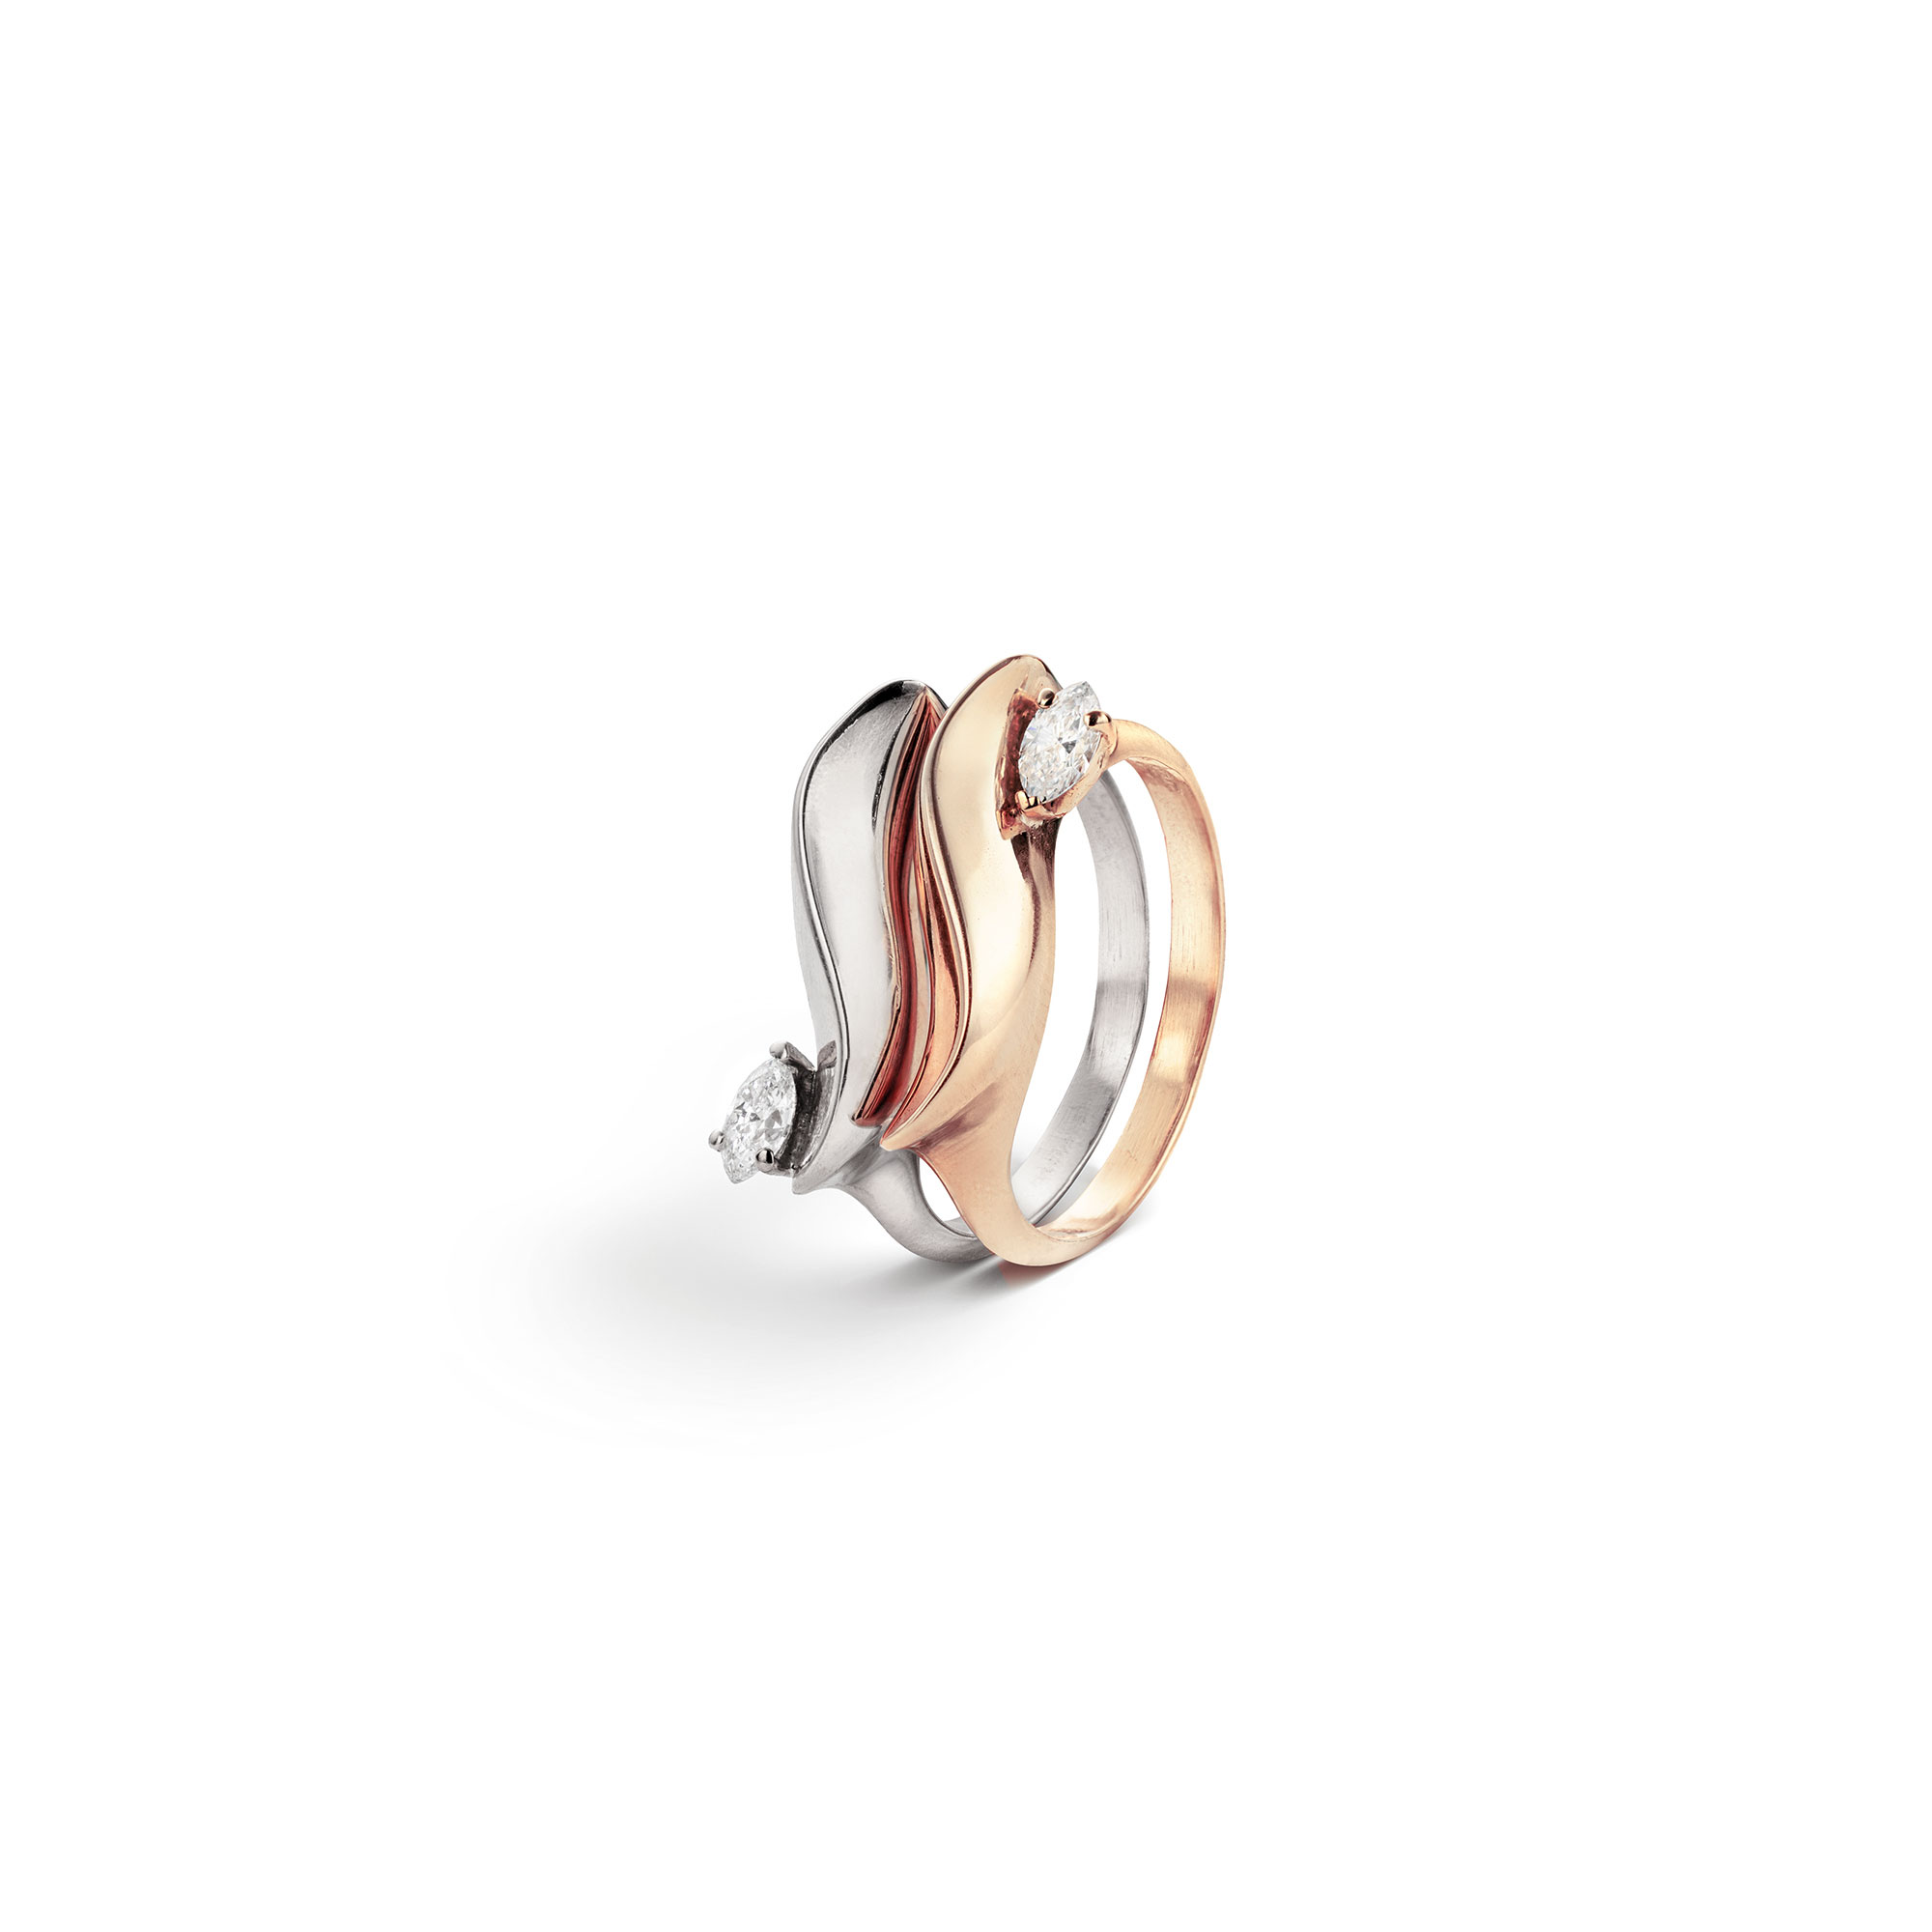 Rose gold 'Flame' ring with diamond FLAME | AN1AU9R CT 0,15 MQ